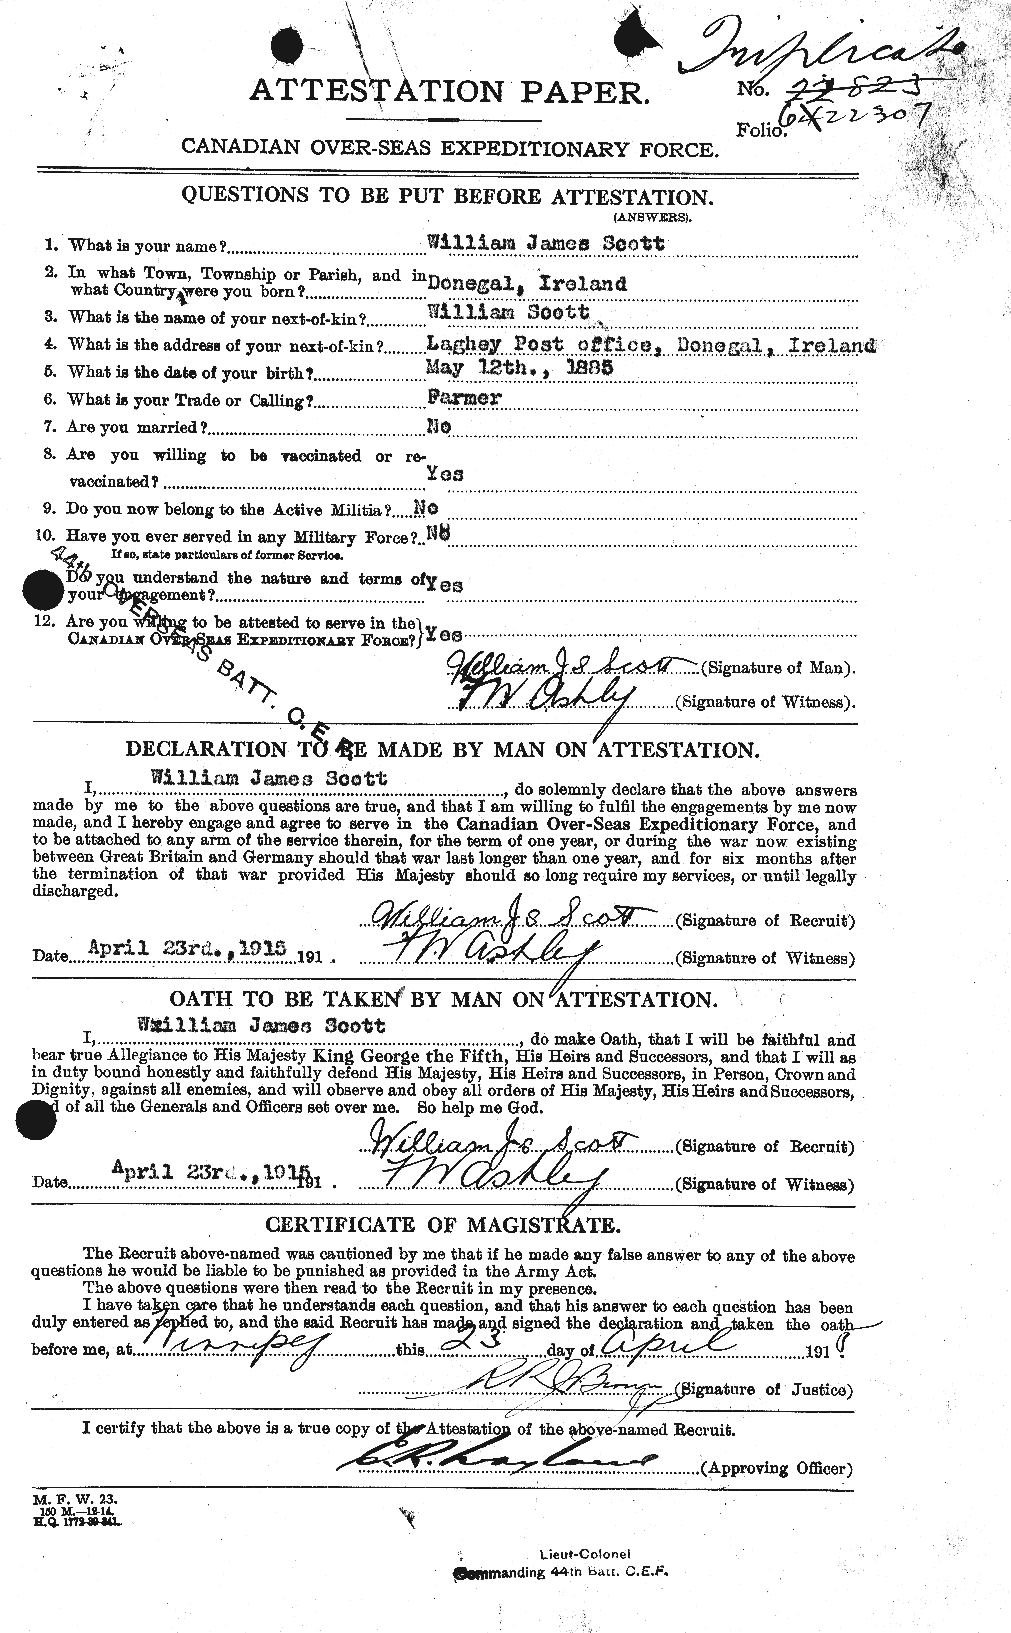 Personnel Records of the First World War - CEF 086770a